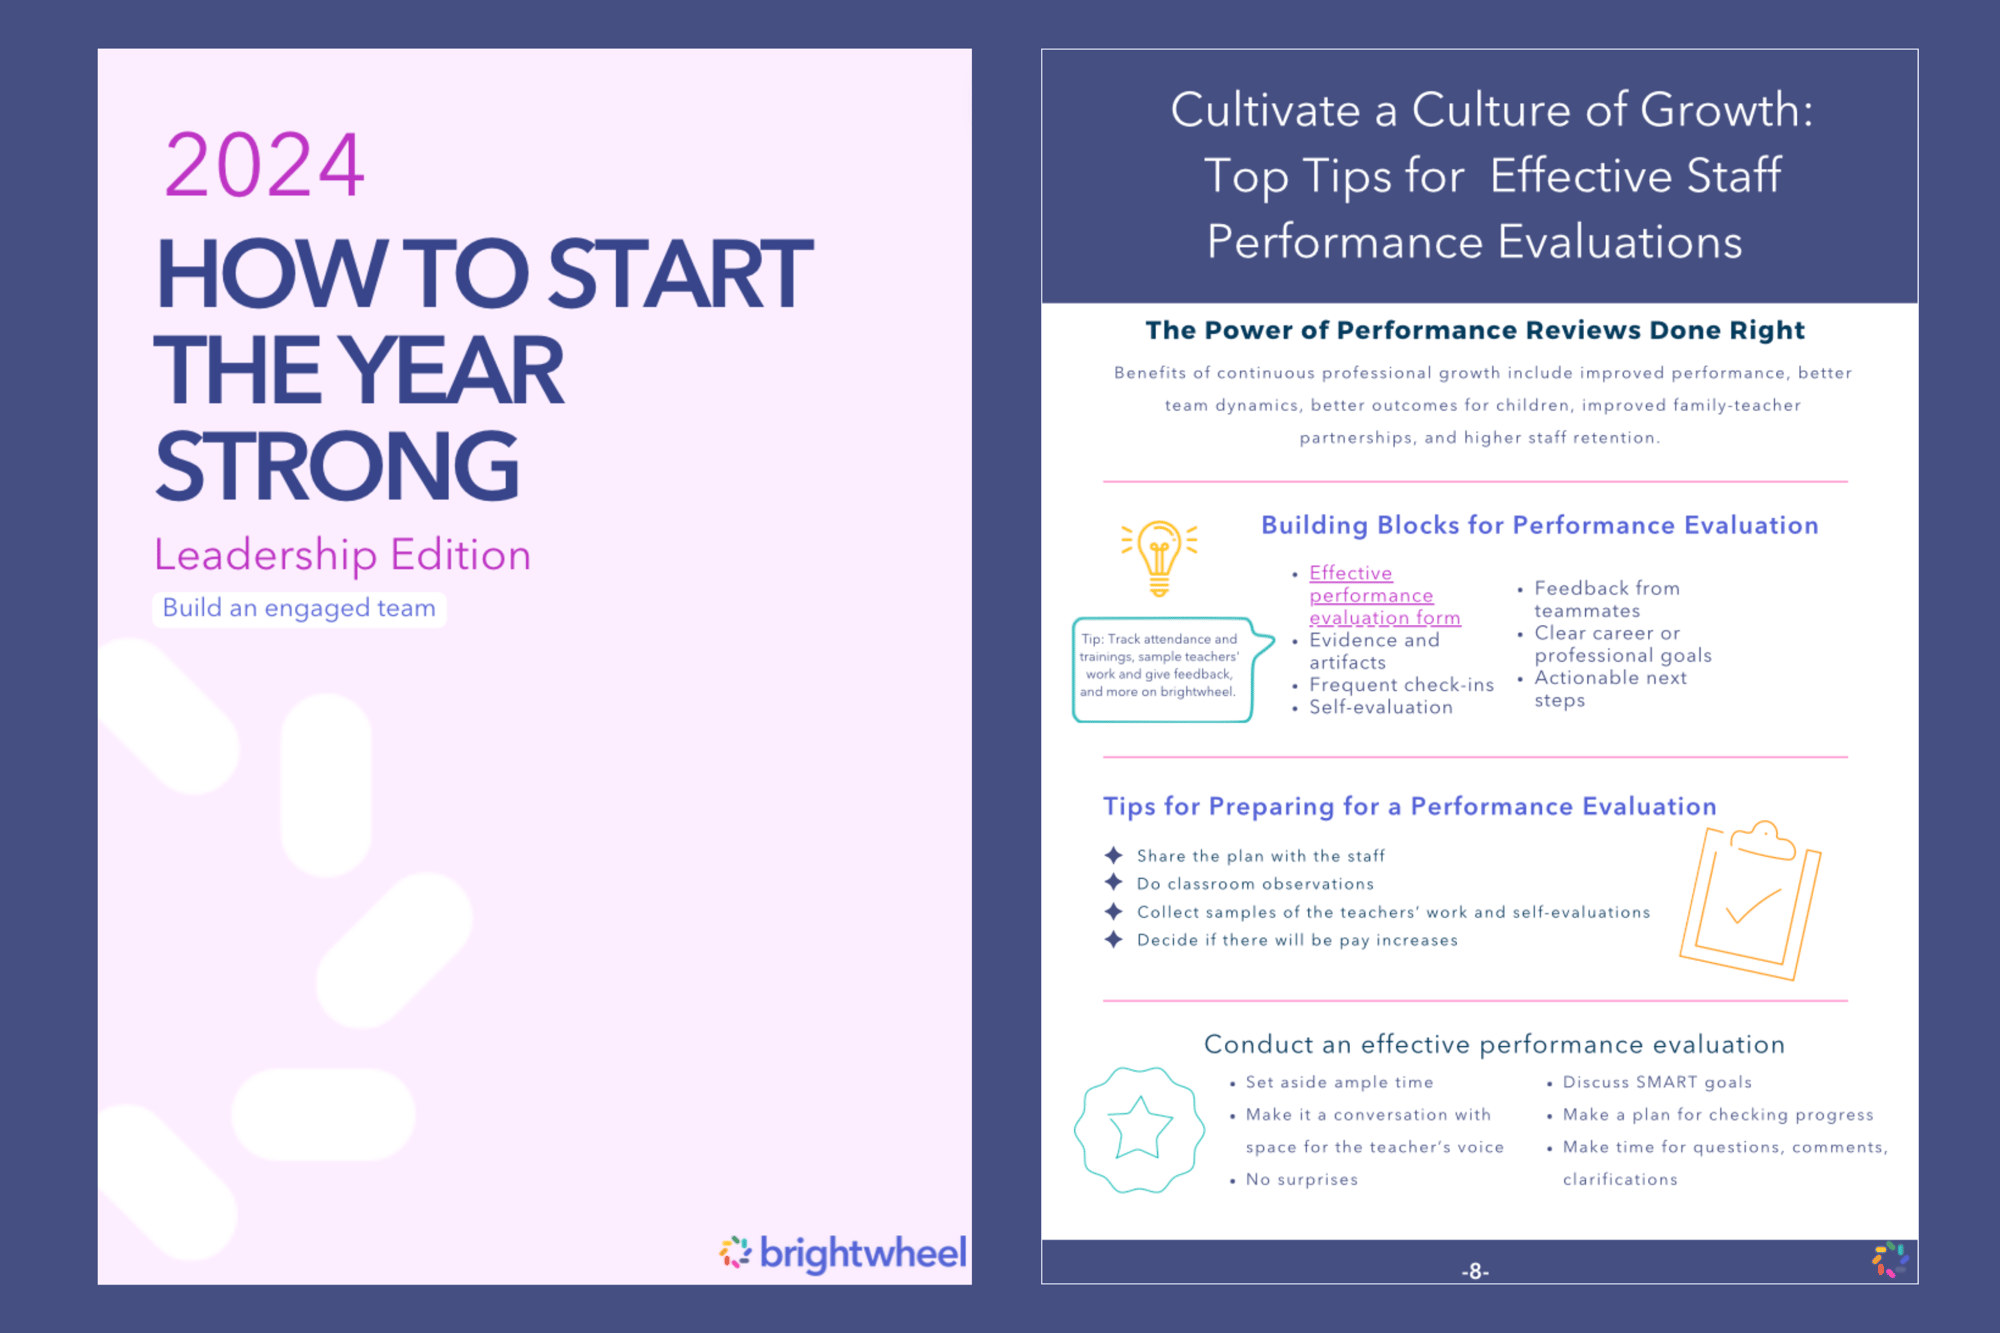 How to Start the Year Strong - Build an engaged team